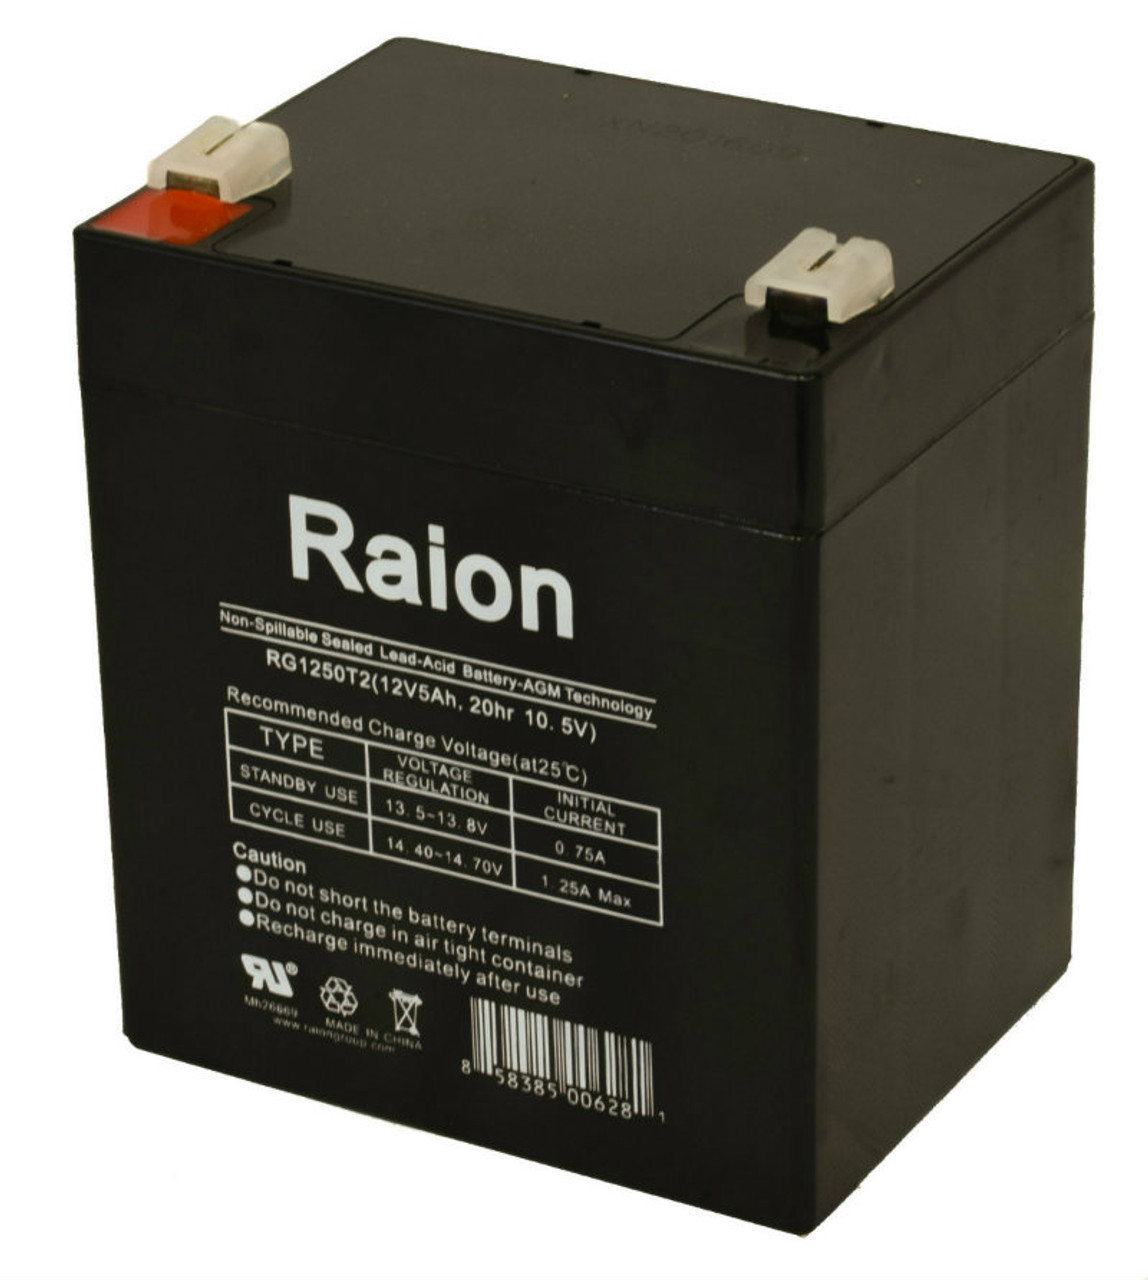 Raion Power RG1250T1 Replacement Alarm Security System Battery for Securitron 62SF